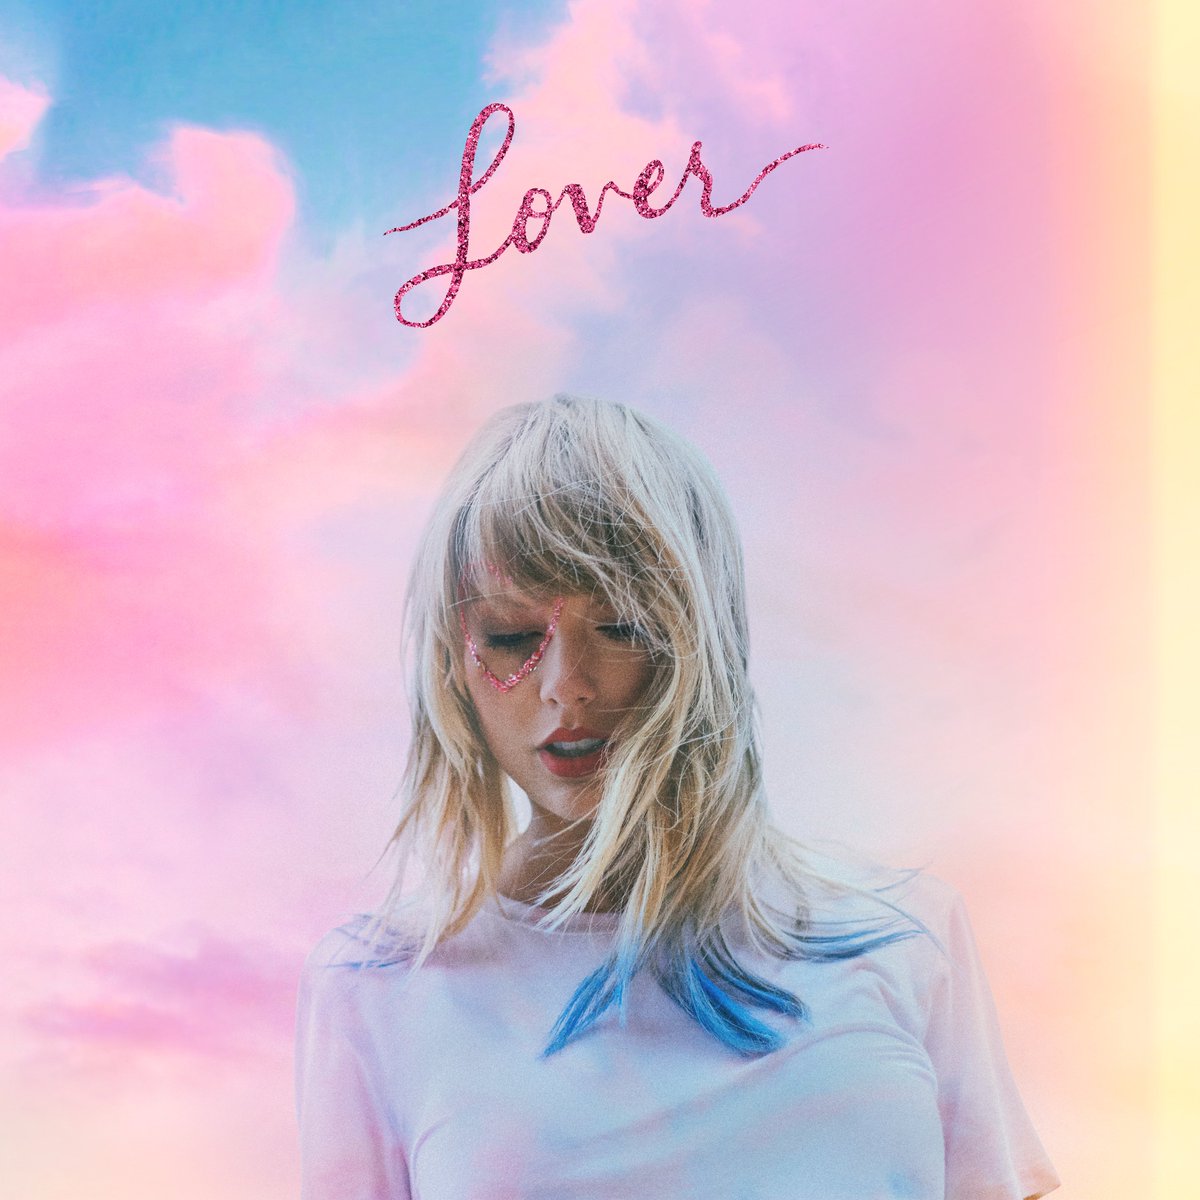 'SOS' has surpassed 'Lover' and was the 4th most streamed female album on Spotify yesterday.